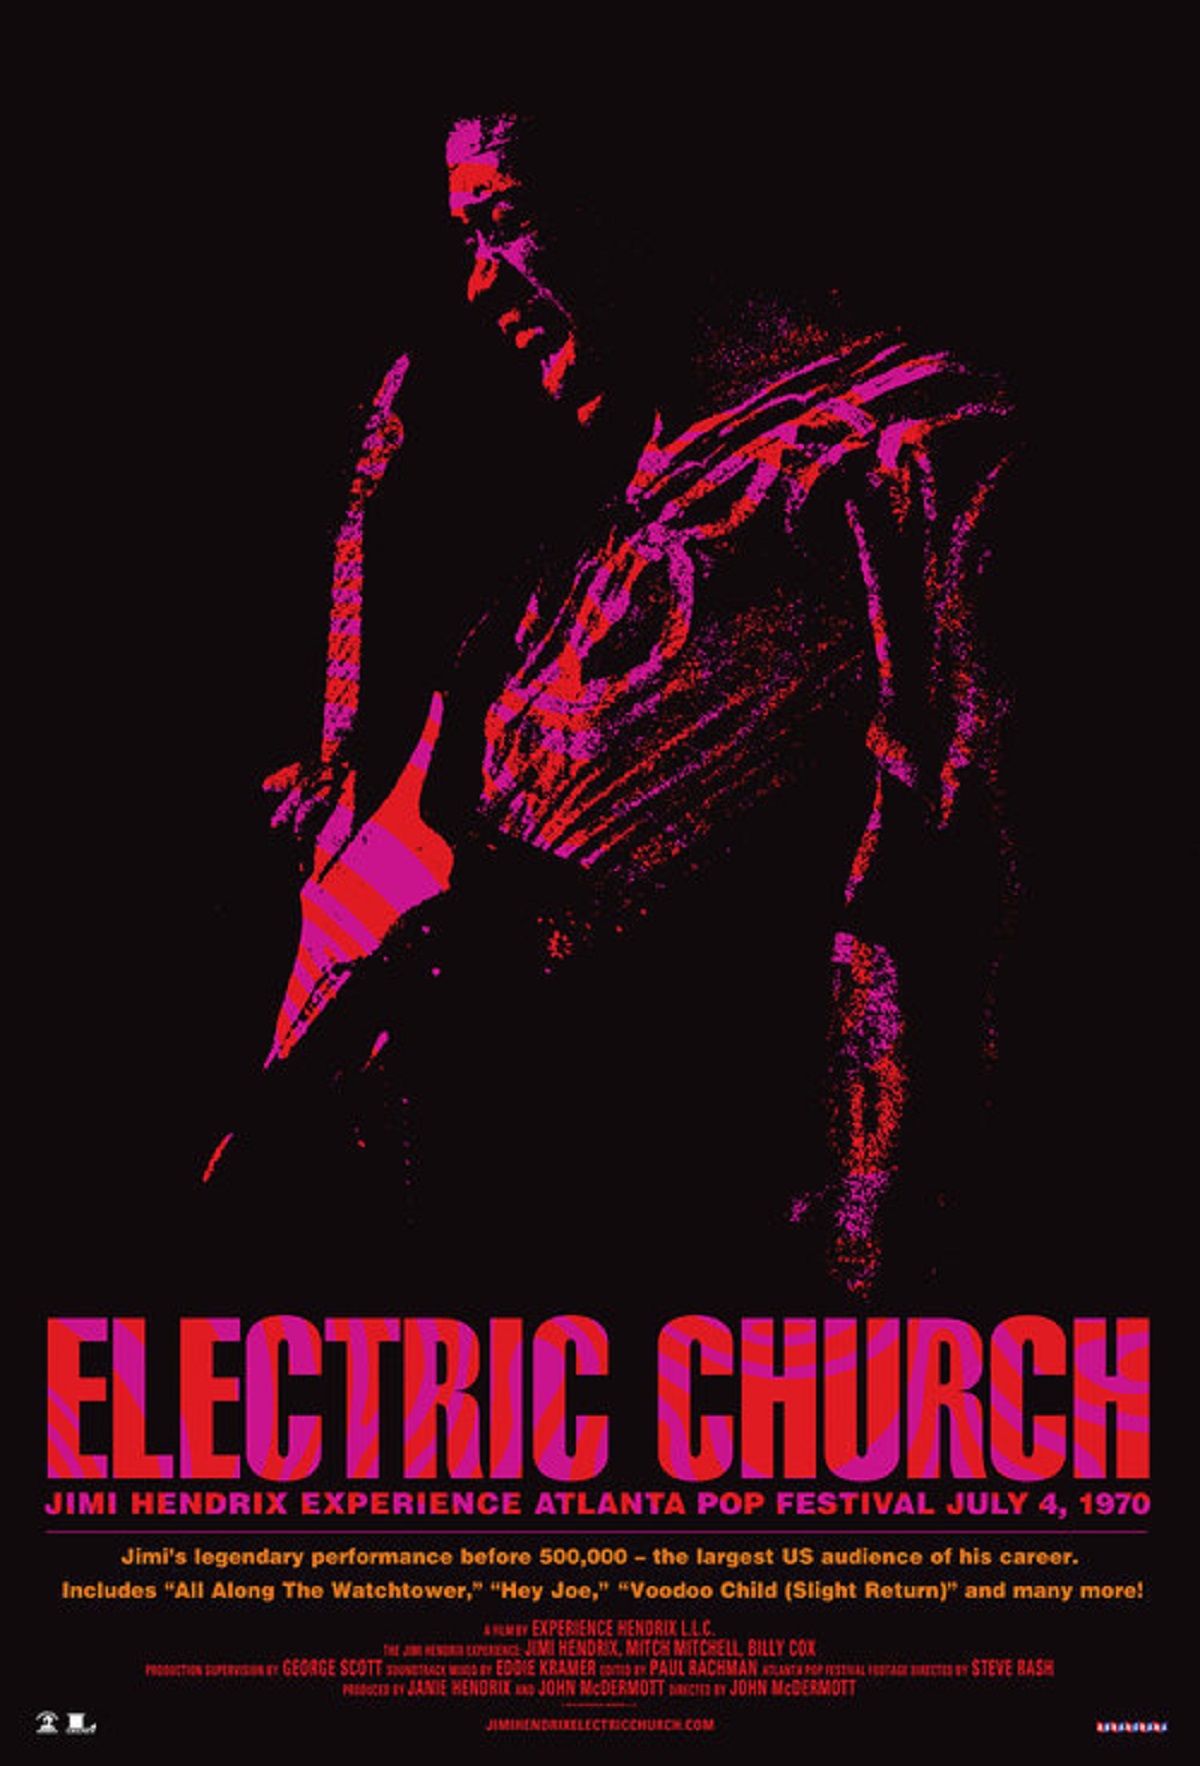 Cabot Theater to screen Jimi Hendrix's "Electric Church" on August 10th